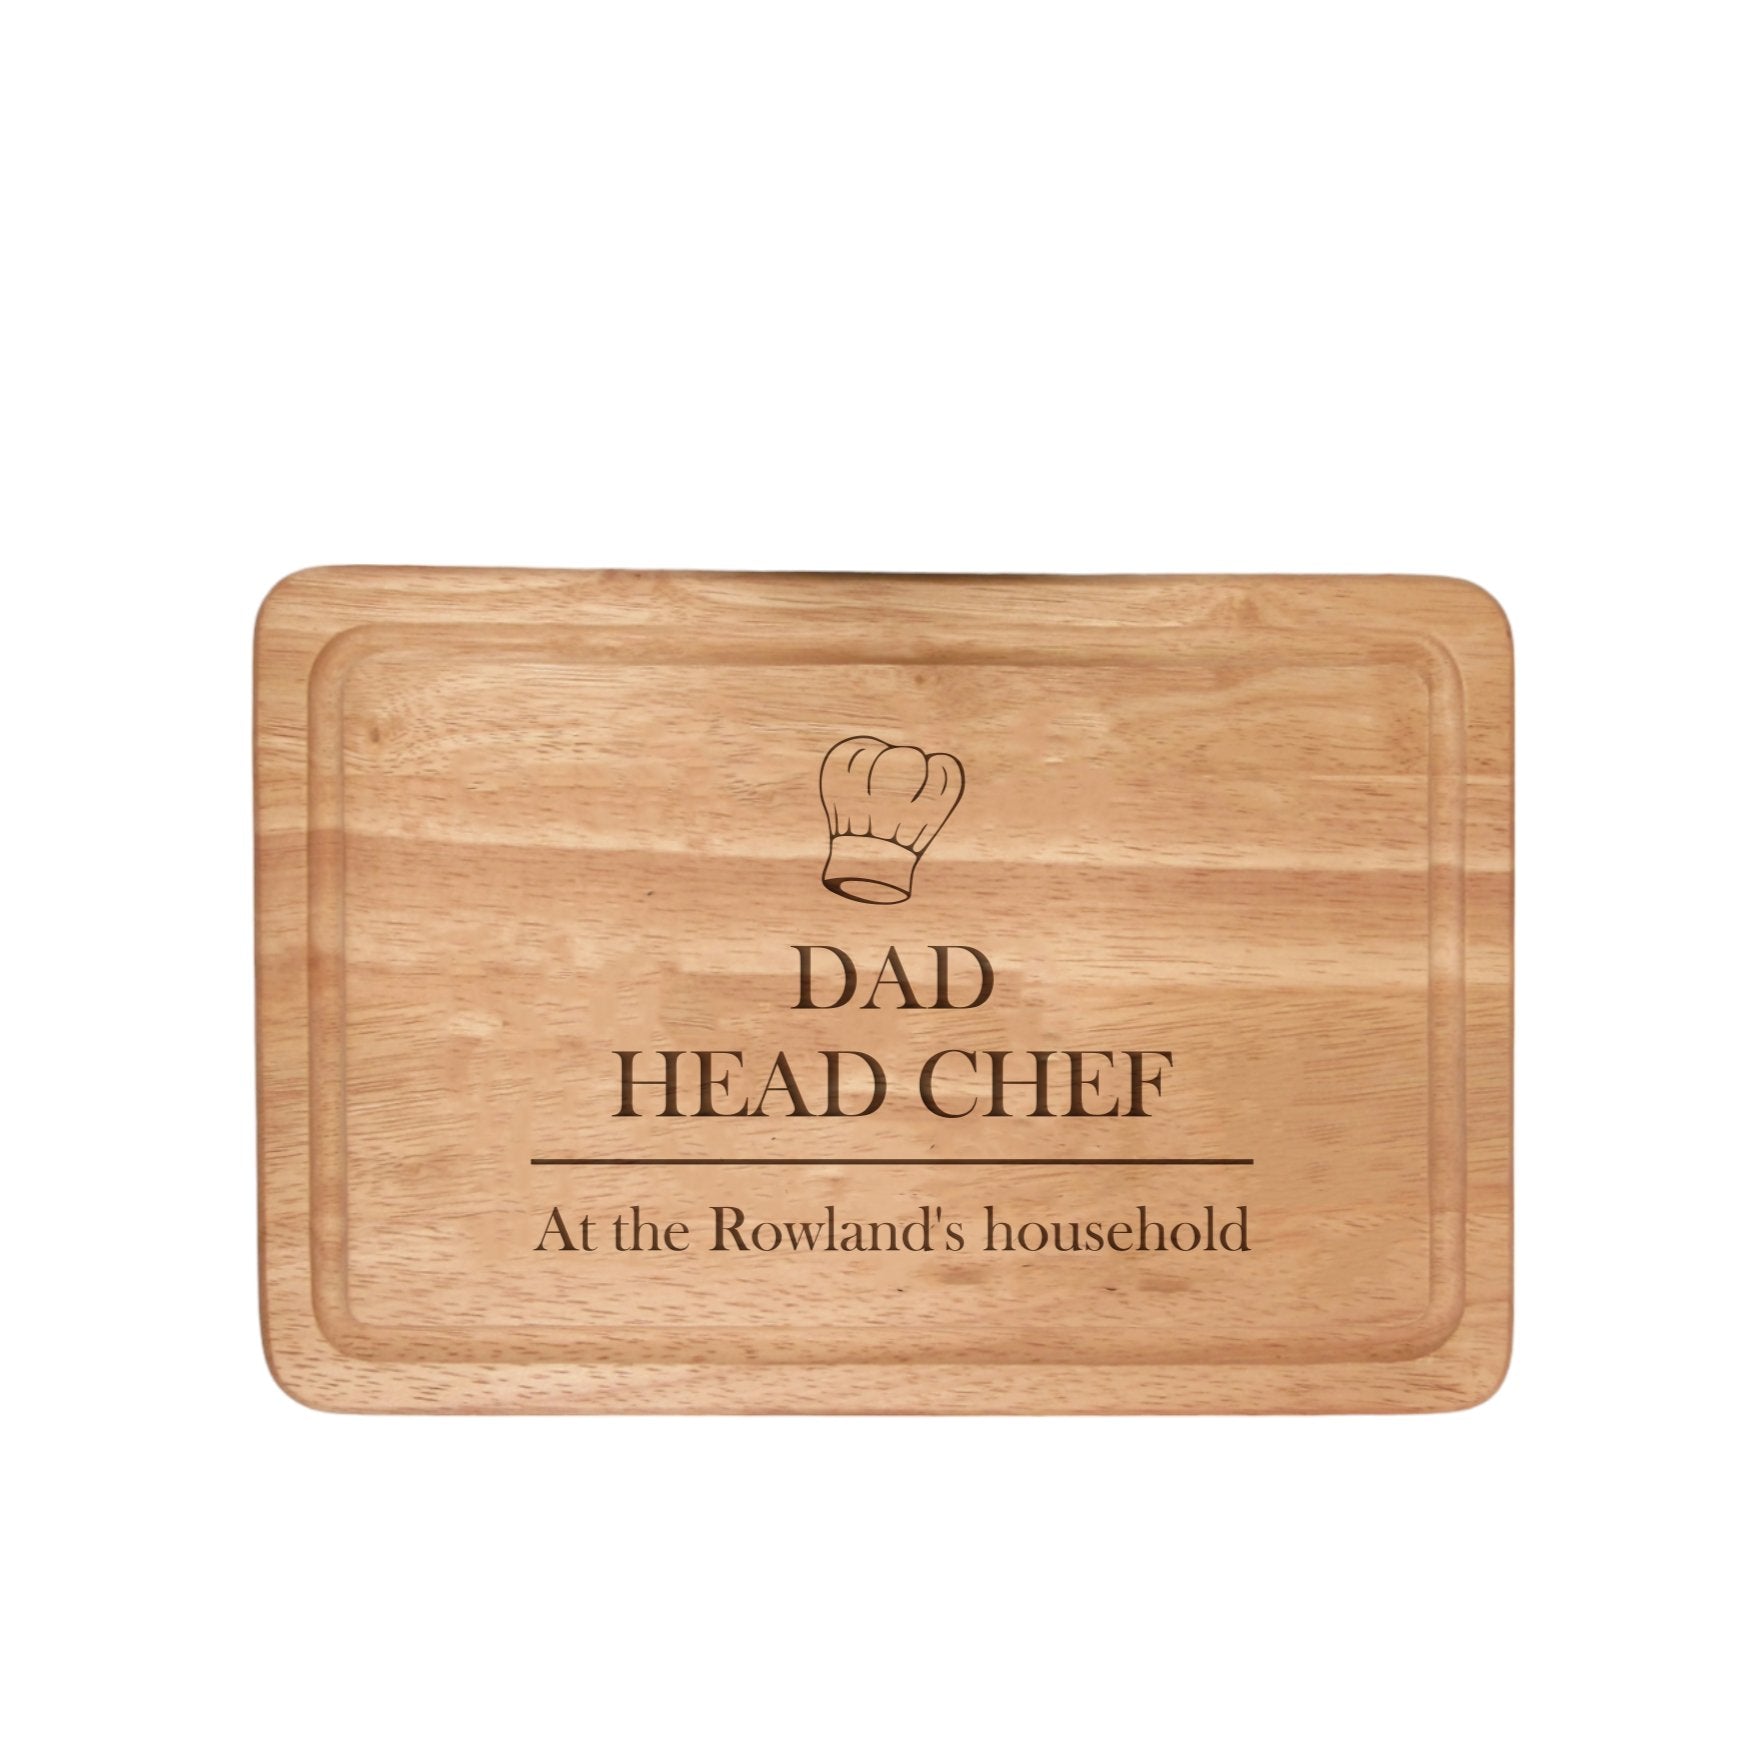 Elevate your kitchen with our 300mmX200mm Personalised Chopping Board. Crafted from premium Hevea Wood, this board features intricate laser-engraved customization, including up to 3 lines of text (20 characters each) and a charming chef hat detail. Ideal for special occasions or daily use. Hand-wash only. Order now for a unique, lasting addition to your culinary space!